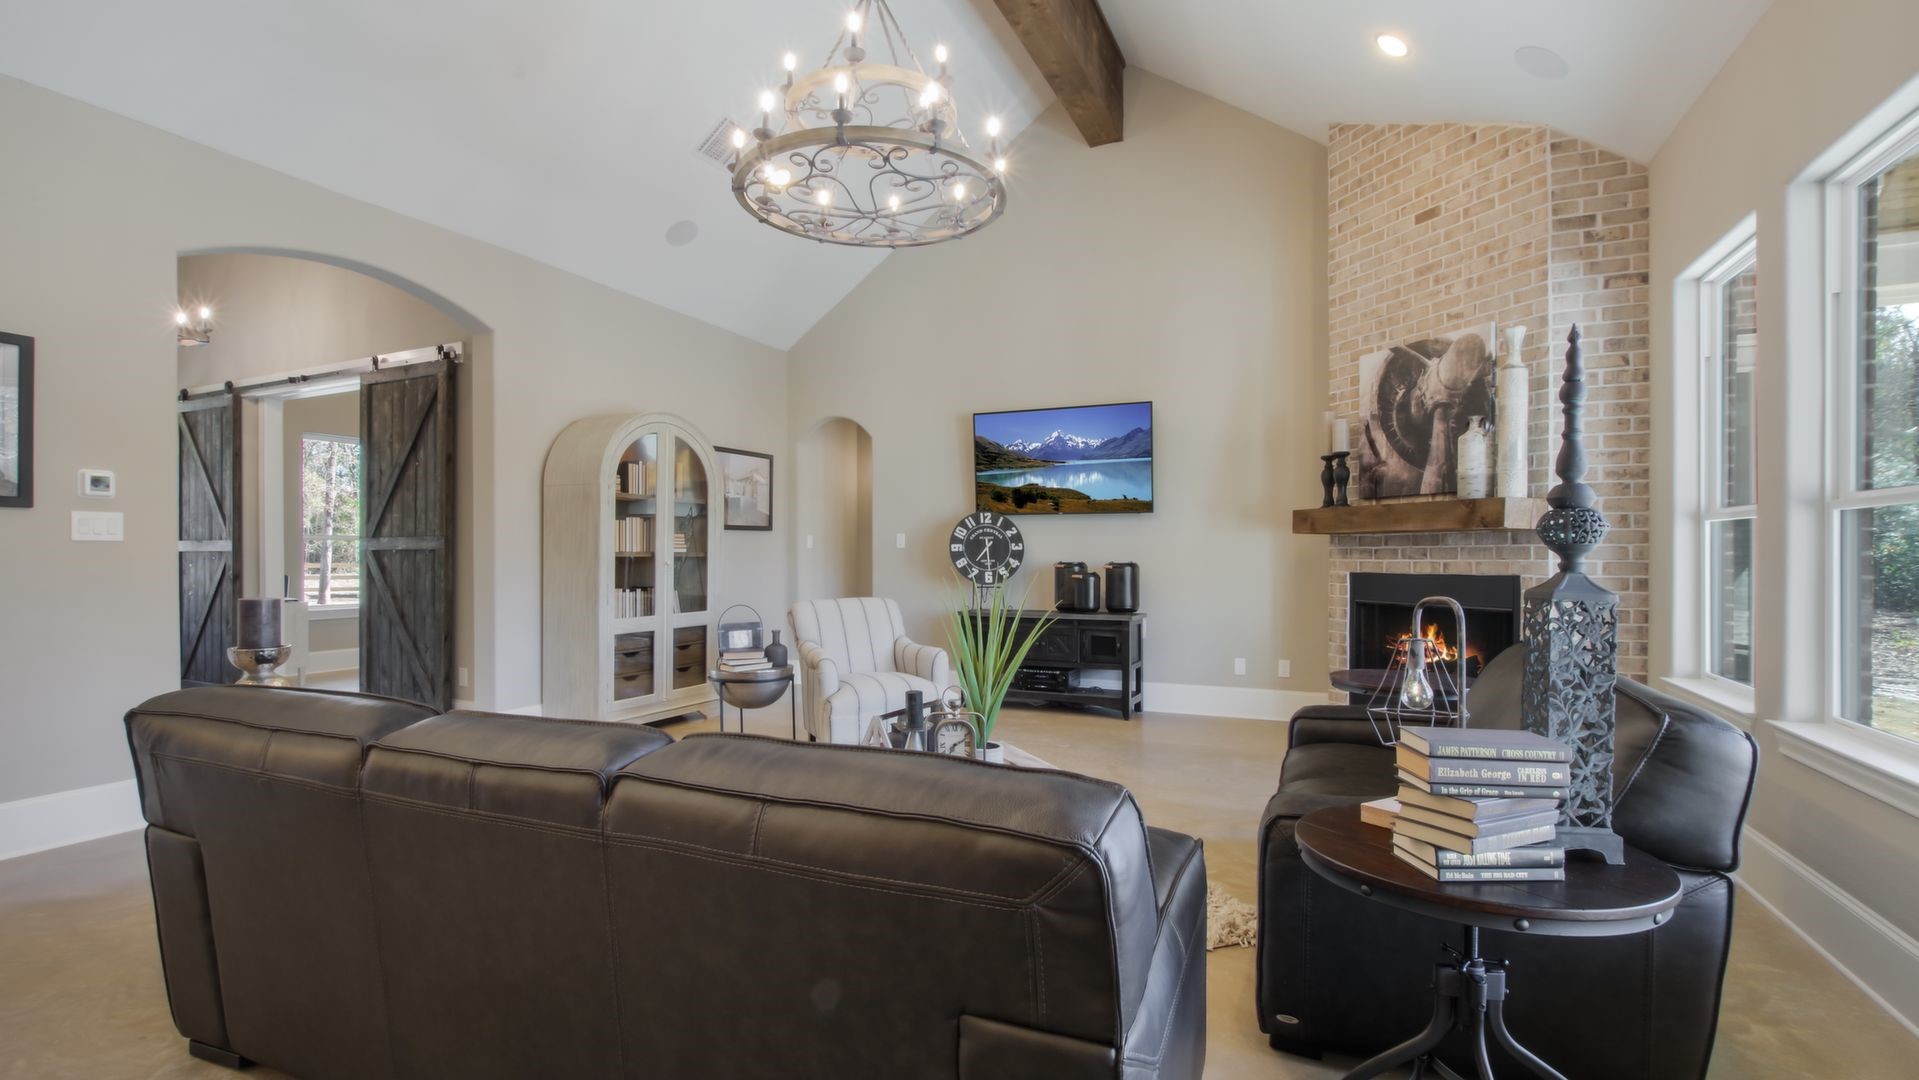 As you enter the residence the custom touches just pop.  Home office/study with brick accent wall is to the left featuring large sliding barn doors.  All open to the living room and view of backyard.